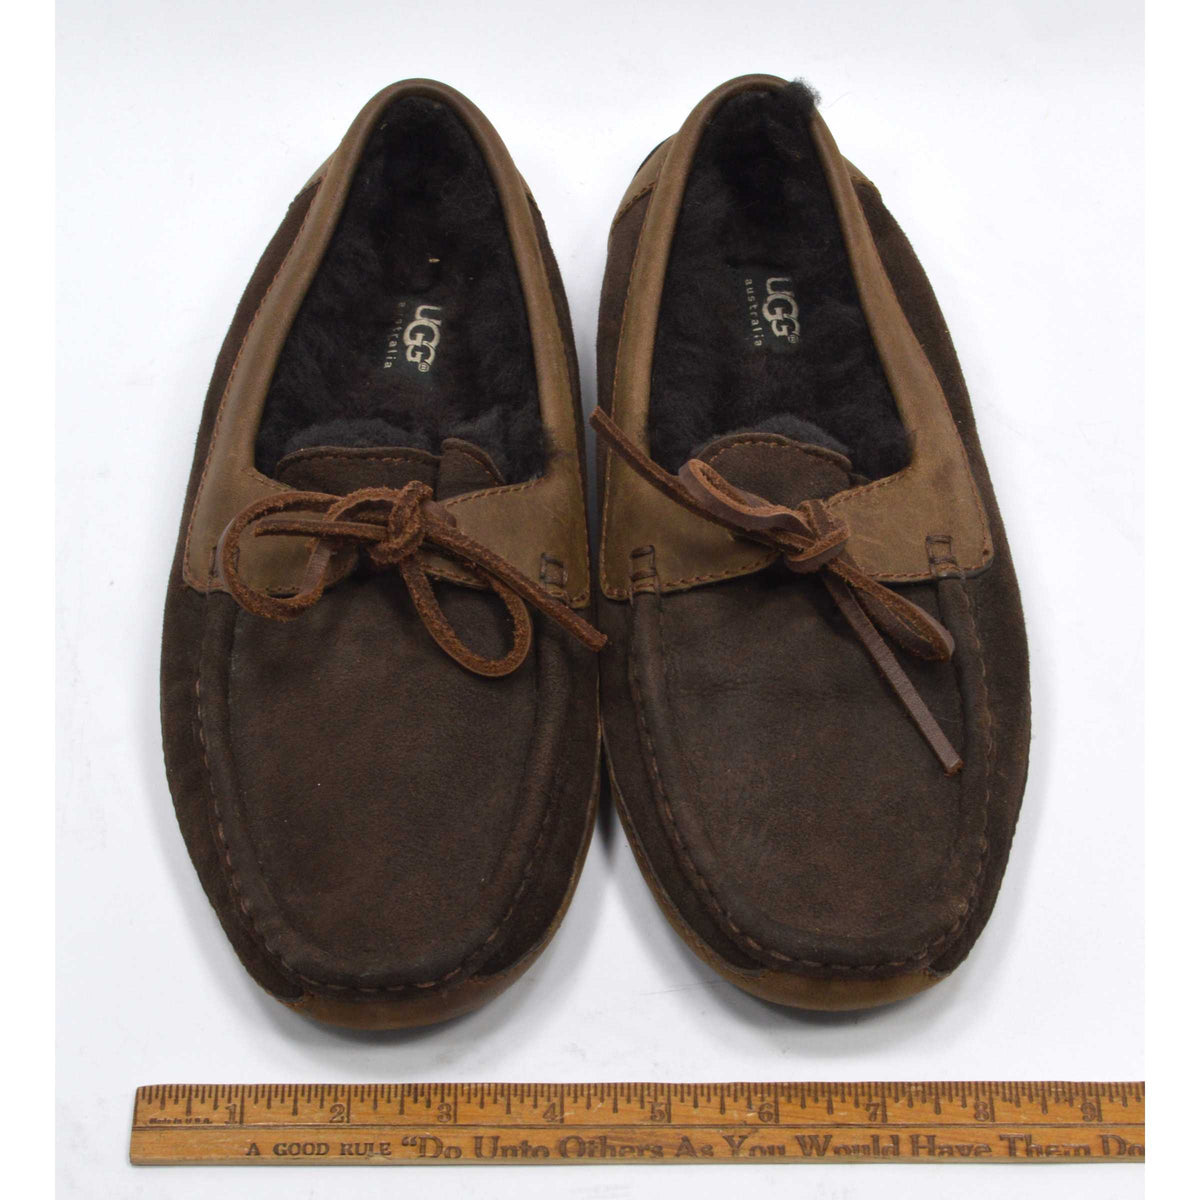 Worn Once UGG BYRON LEATHER SLIPPERS #5102 Cappuccino INDOOR